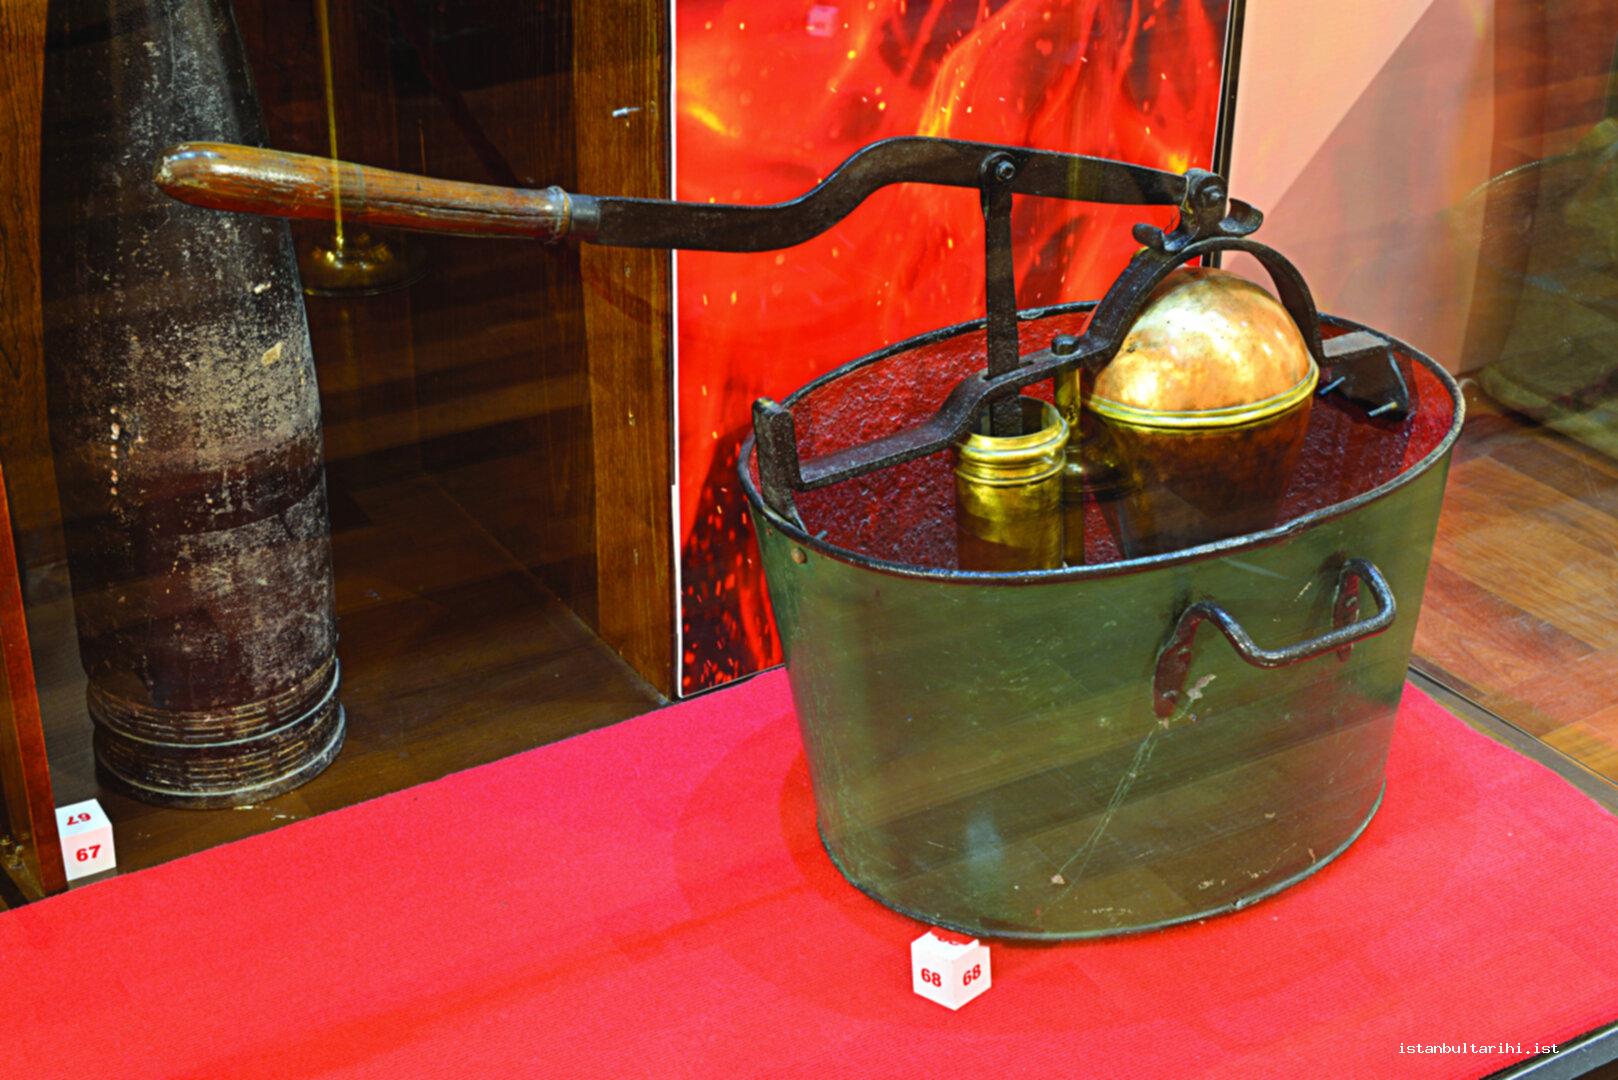 10a- Sheltered pumps from the 19<sup>th</sup> century (Istanbul Metropolitan Municipality, Fire Department Museum)